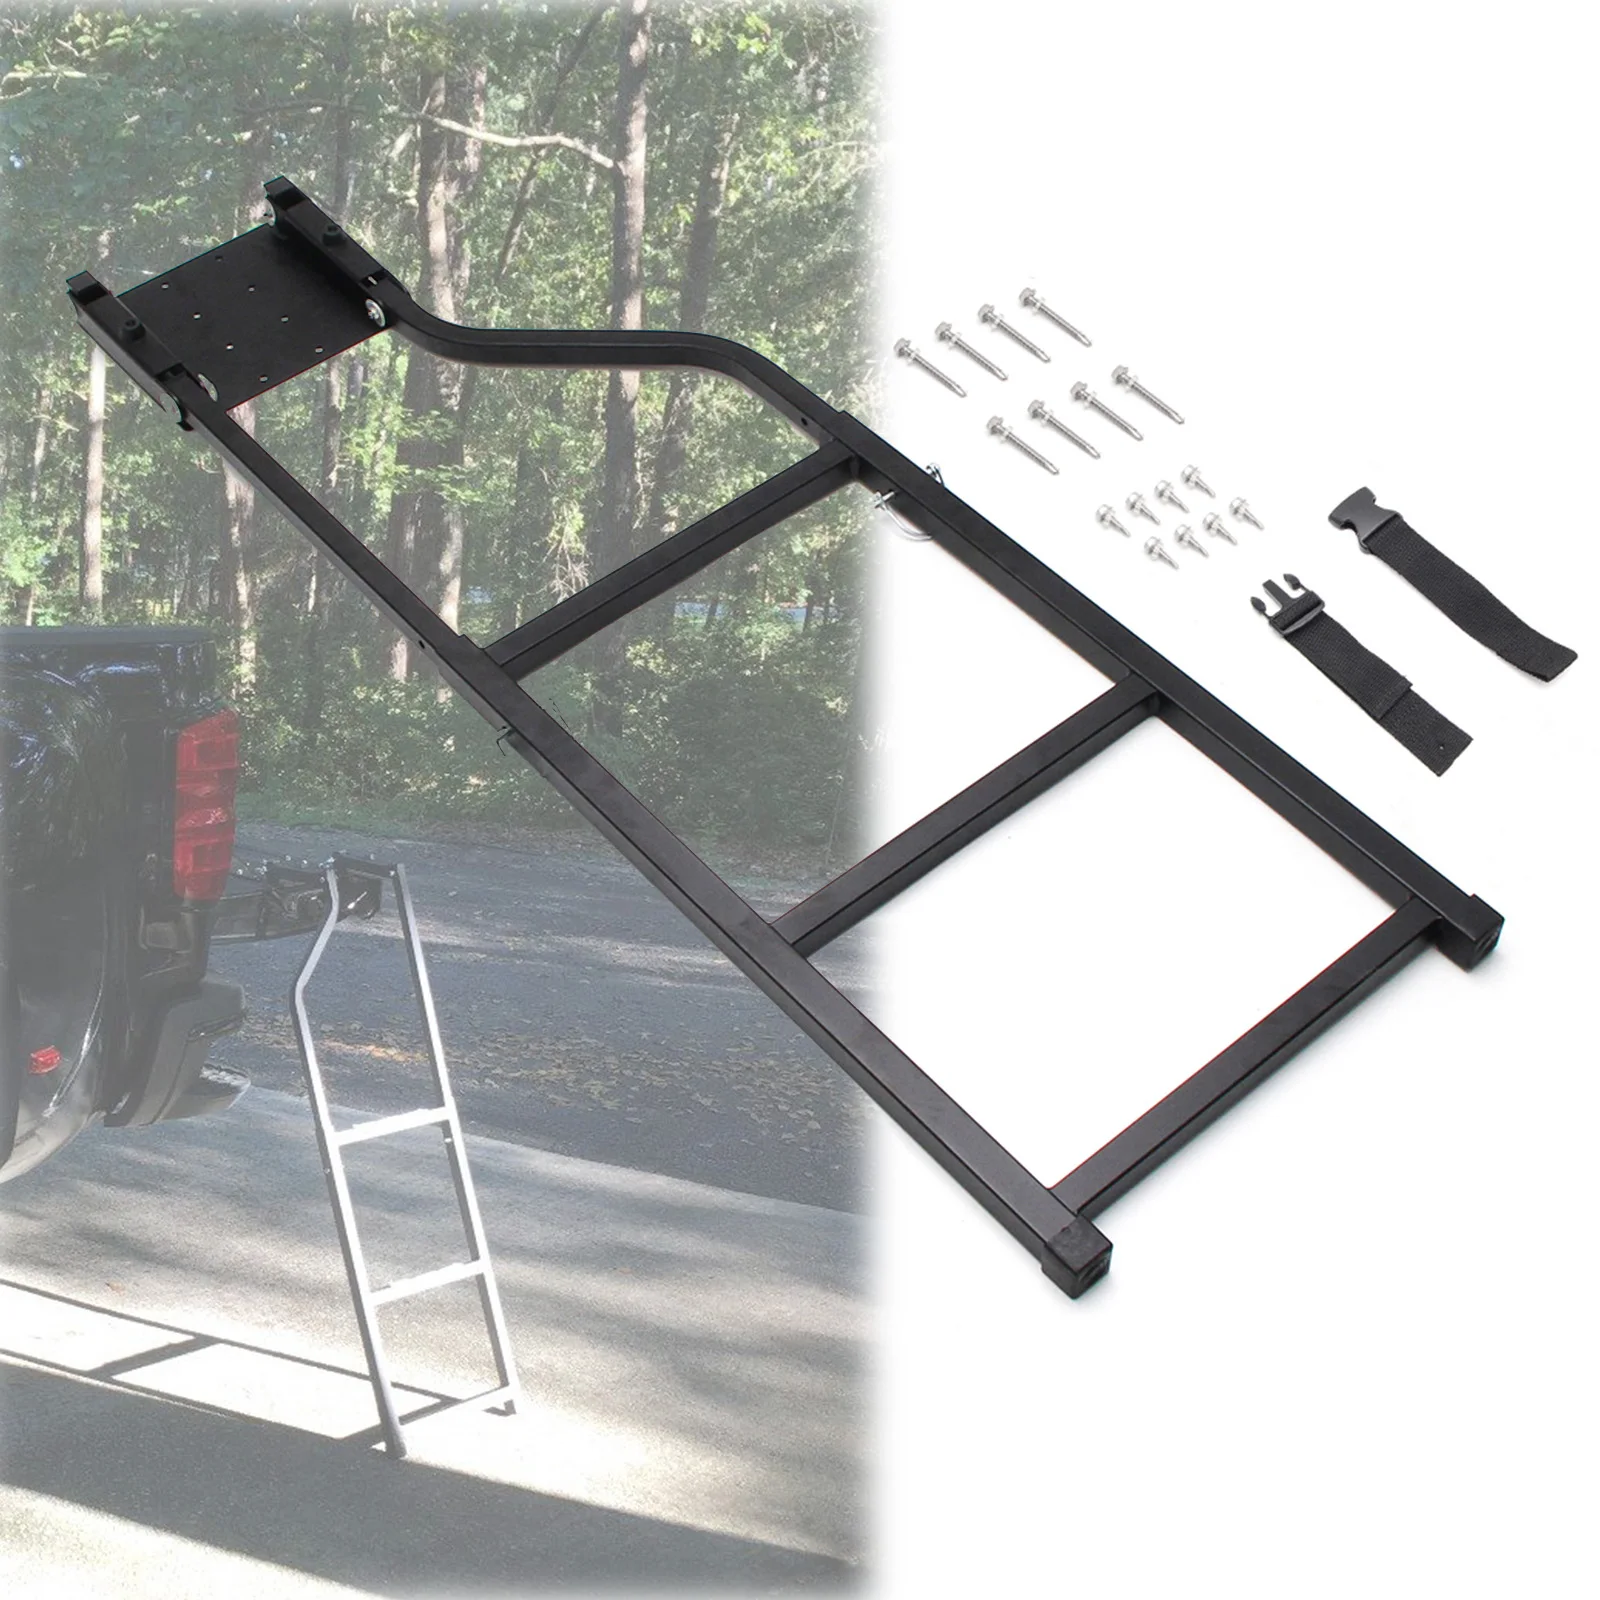 1 pcs Pickup Tailgate Step Cargo Accessories Truck Bed Ladder Universal Extension Step Ladder with Stainless Steel Self Drilling kingcher new arrival universal aluminum pickup truck bed ladder rack